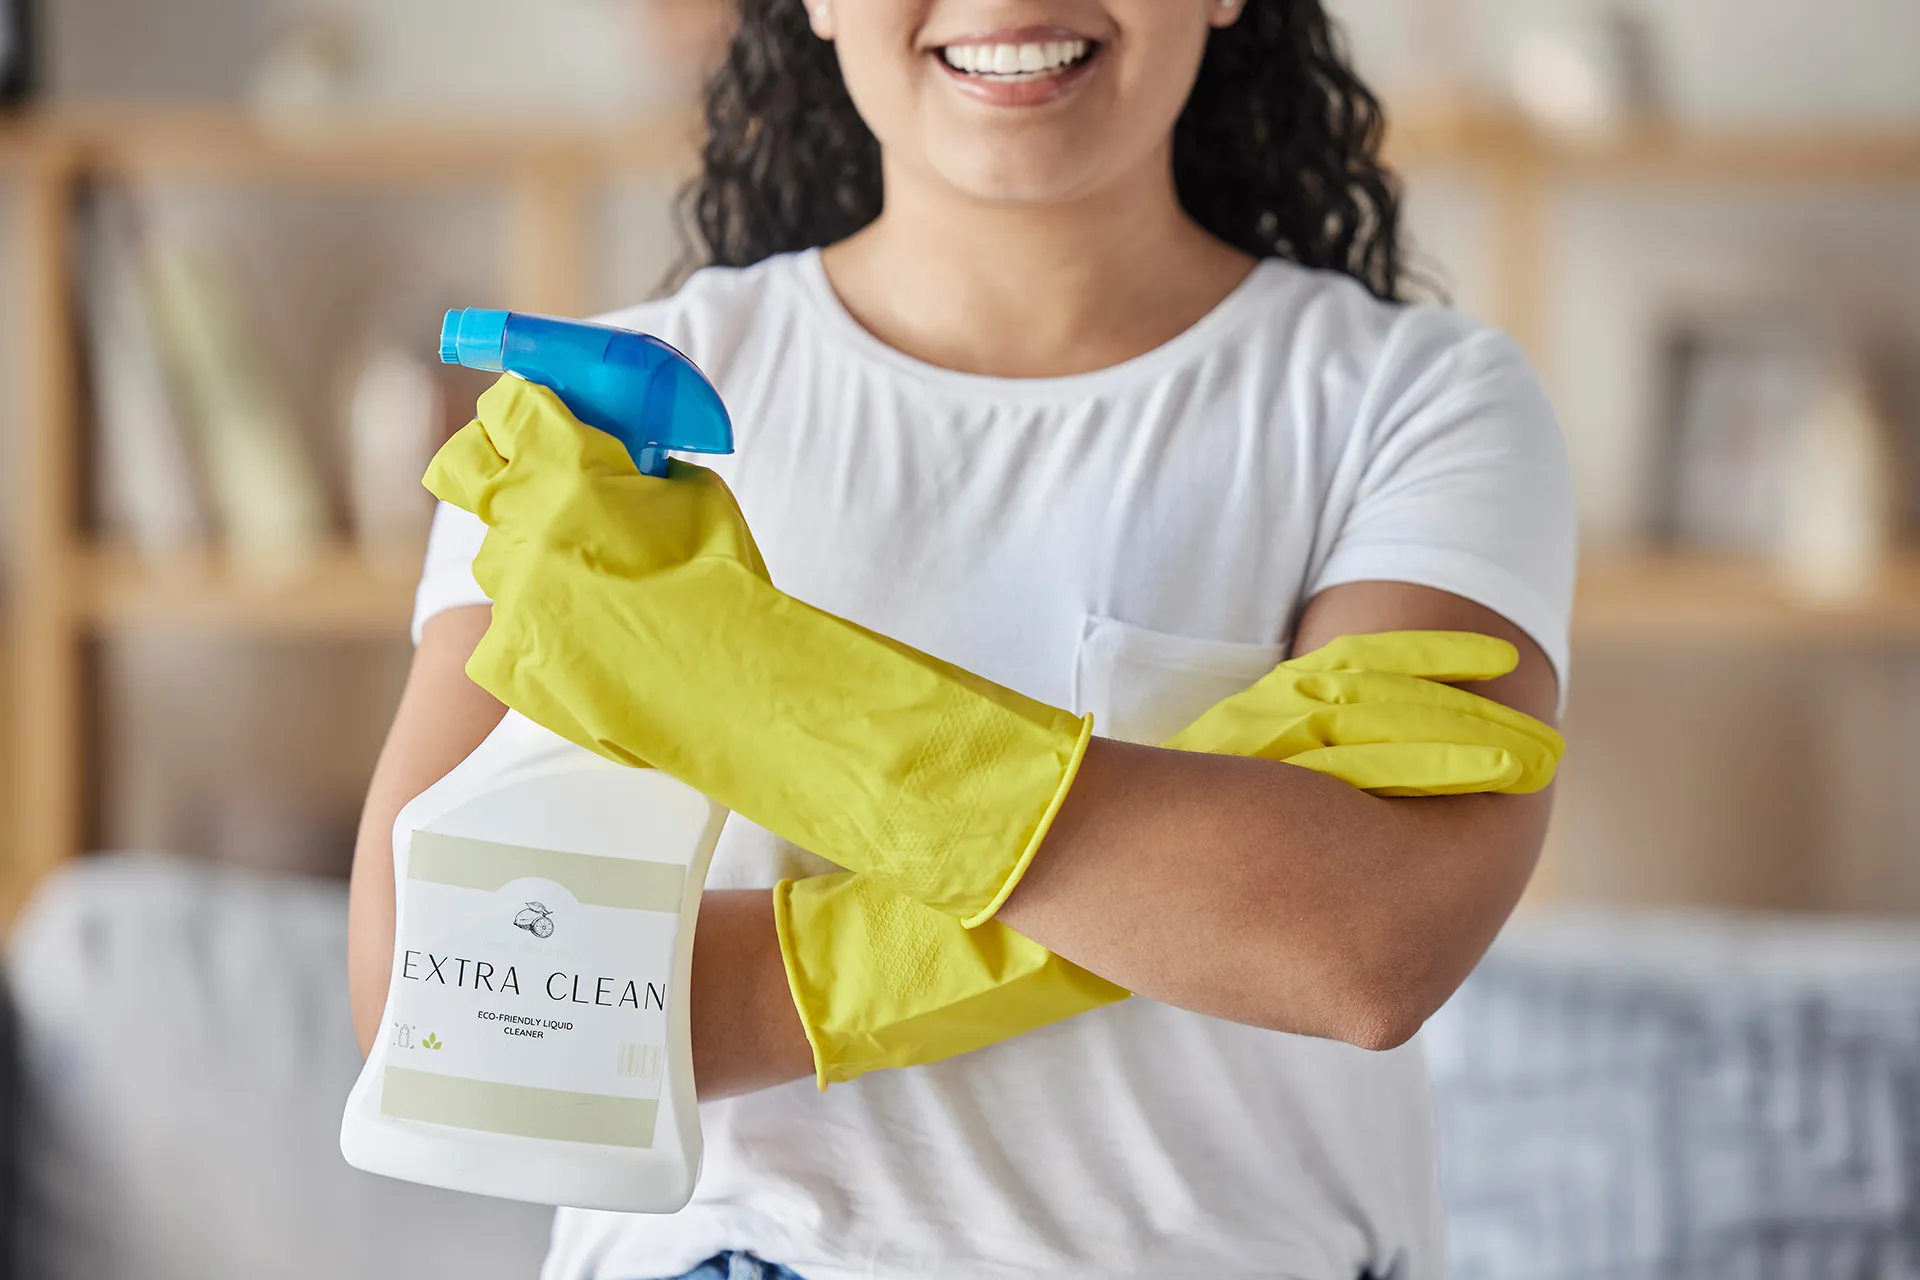 Brite Spot Cleaner holding a cleaning spray